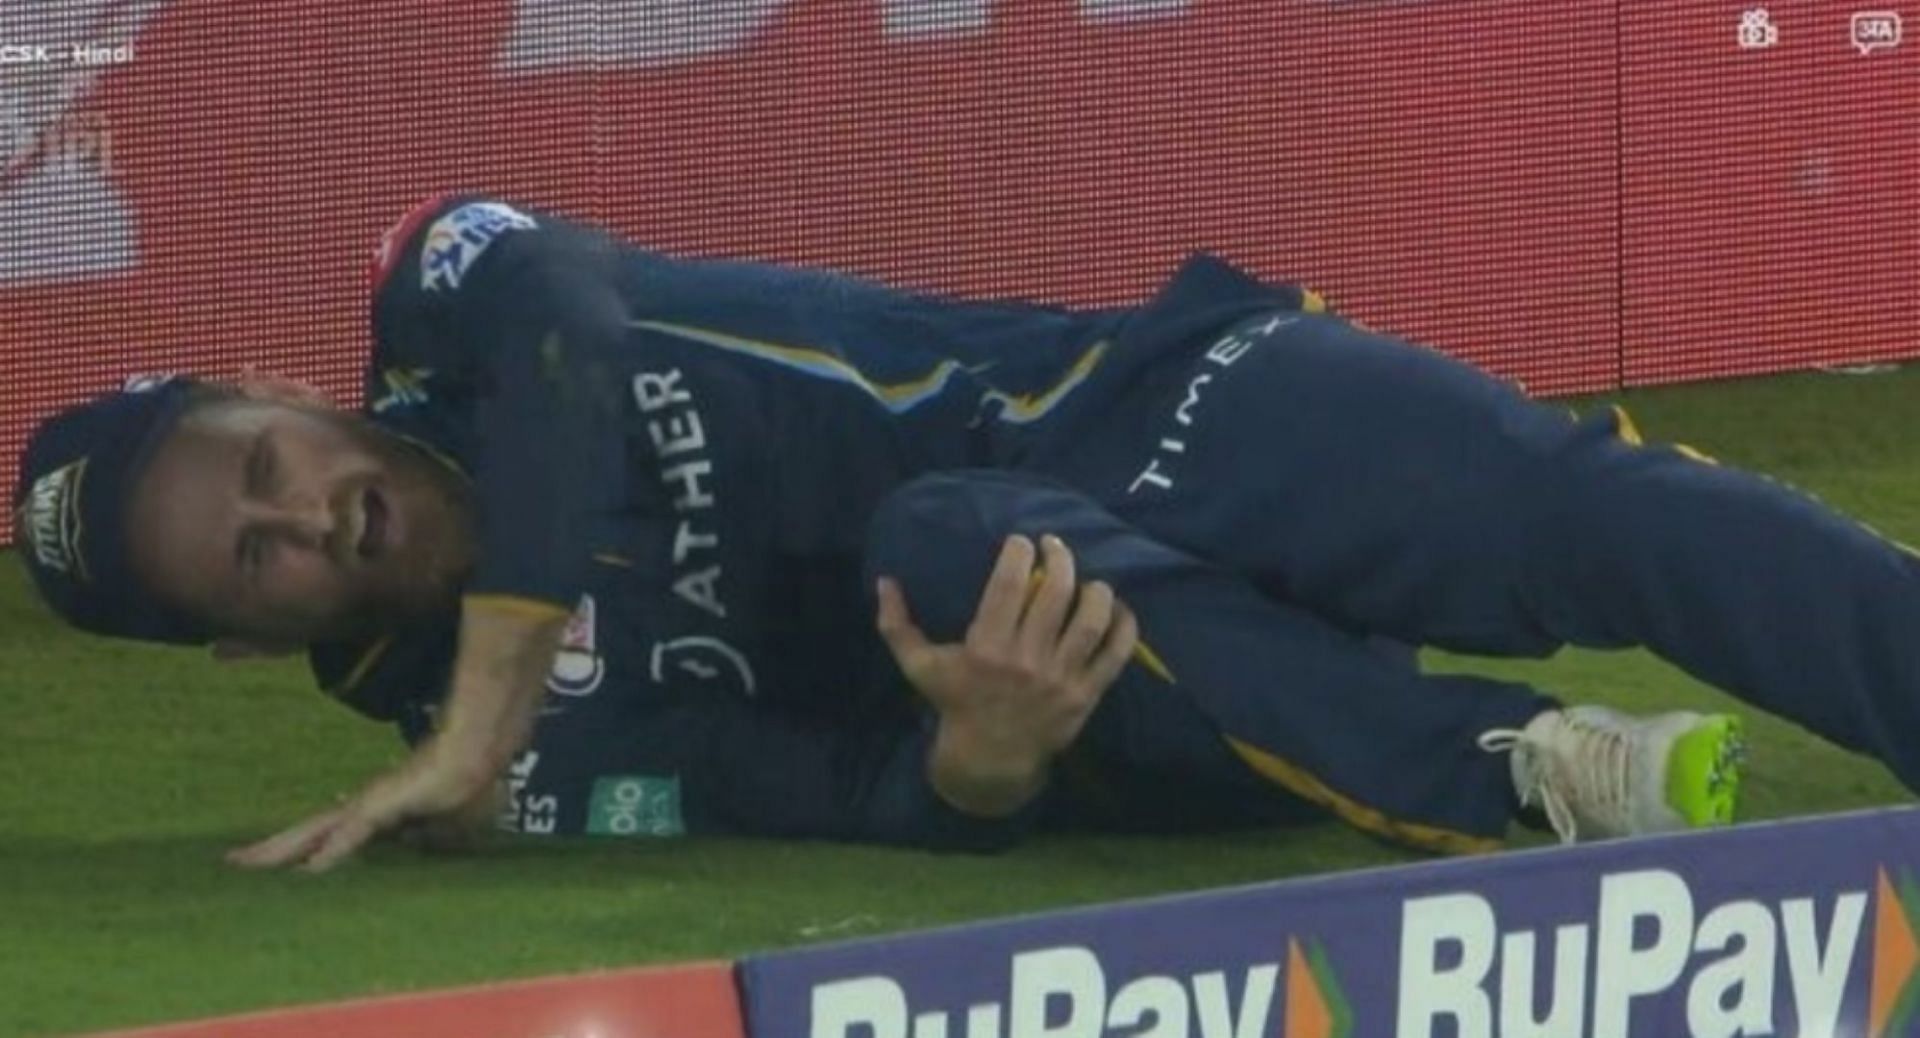 Kane Williamson injured his knee in an attempt to take a catch on the boundary